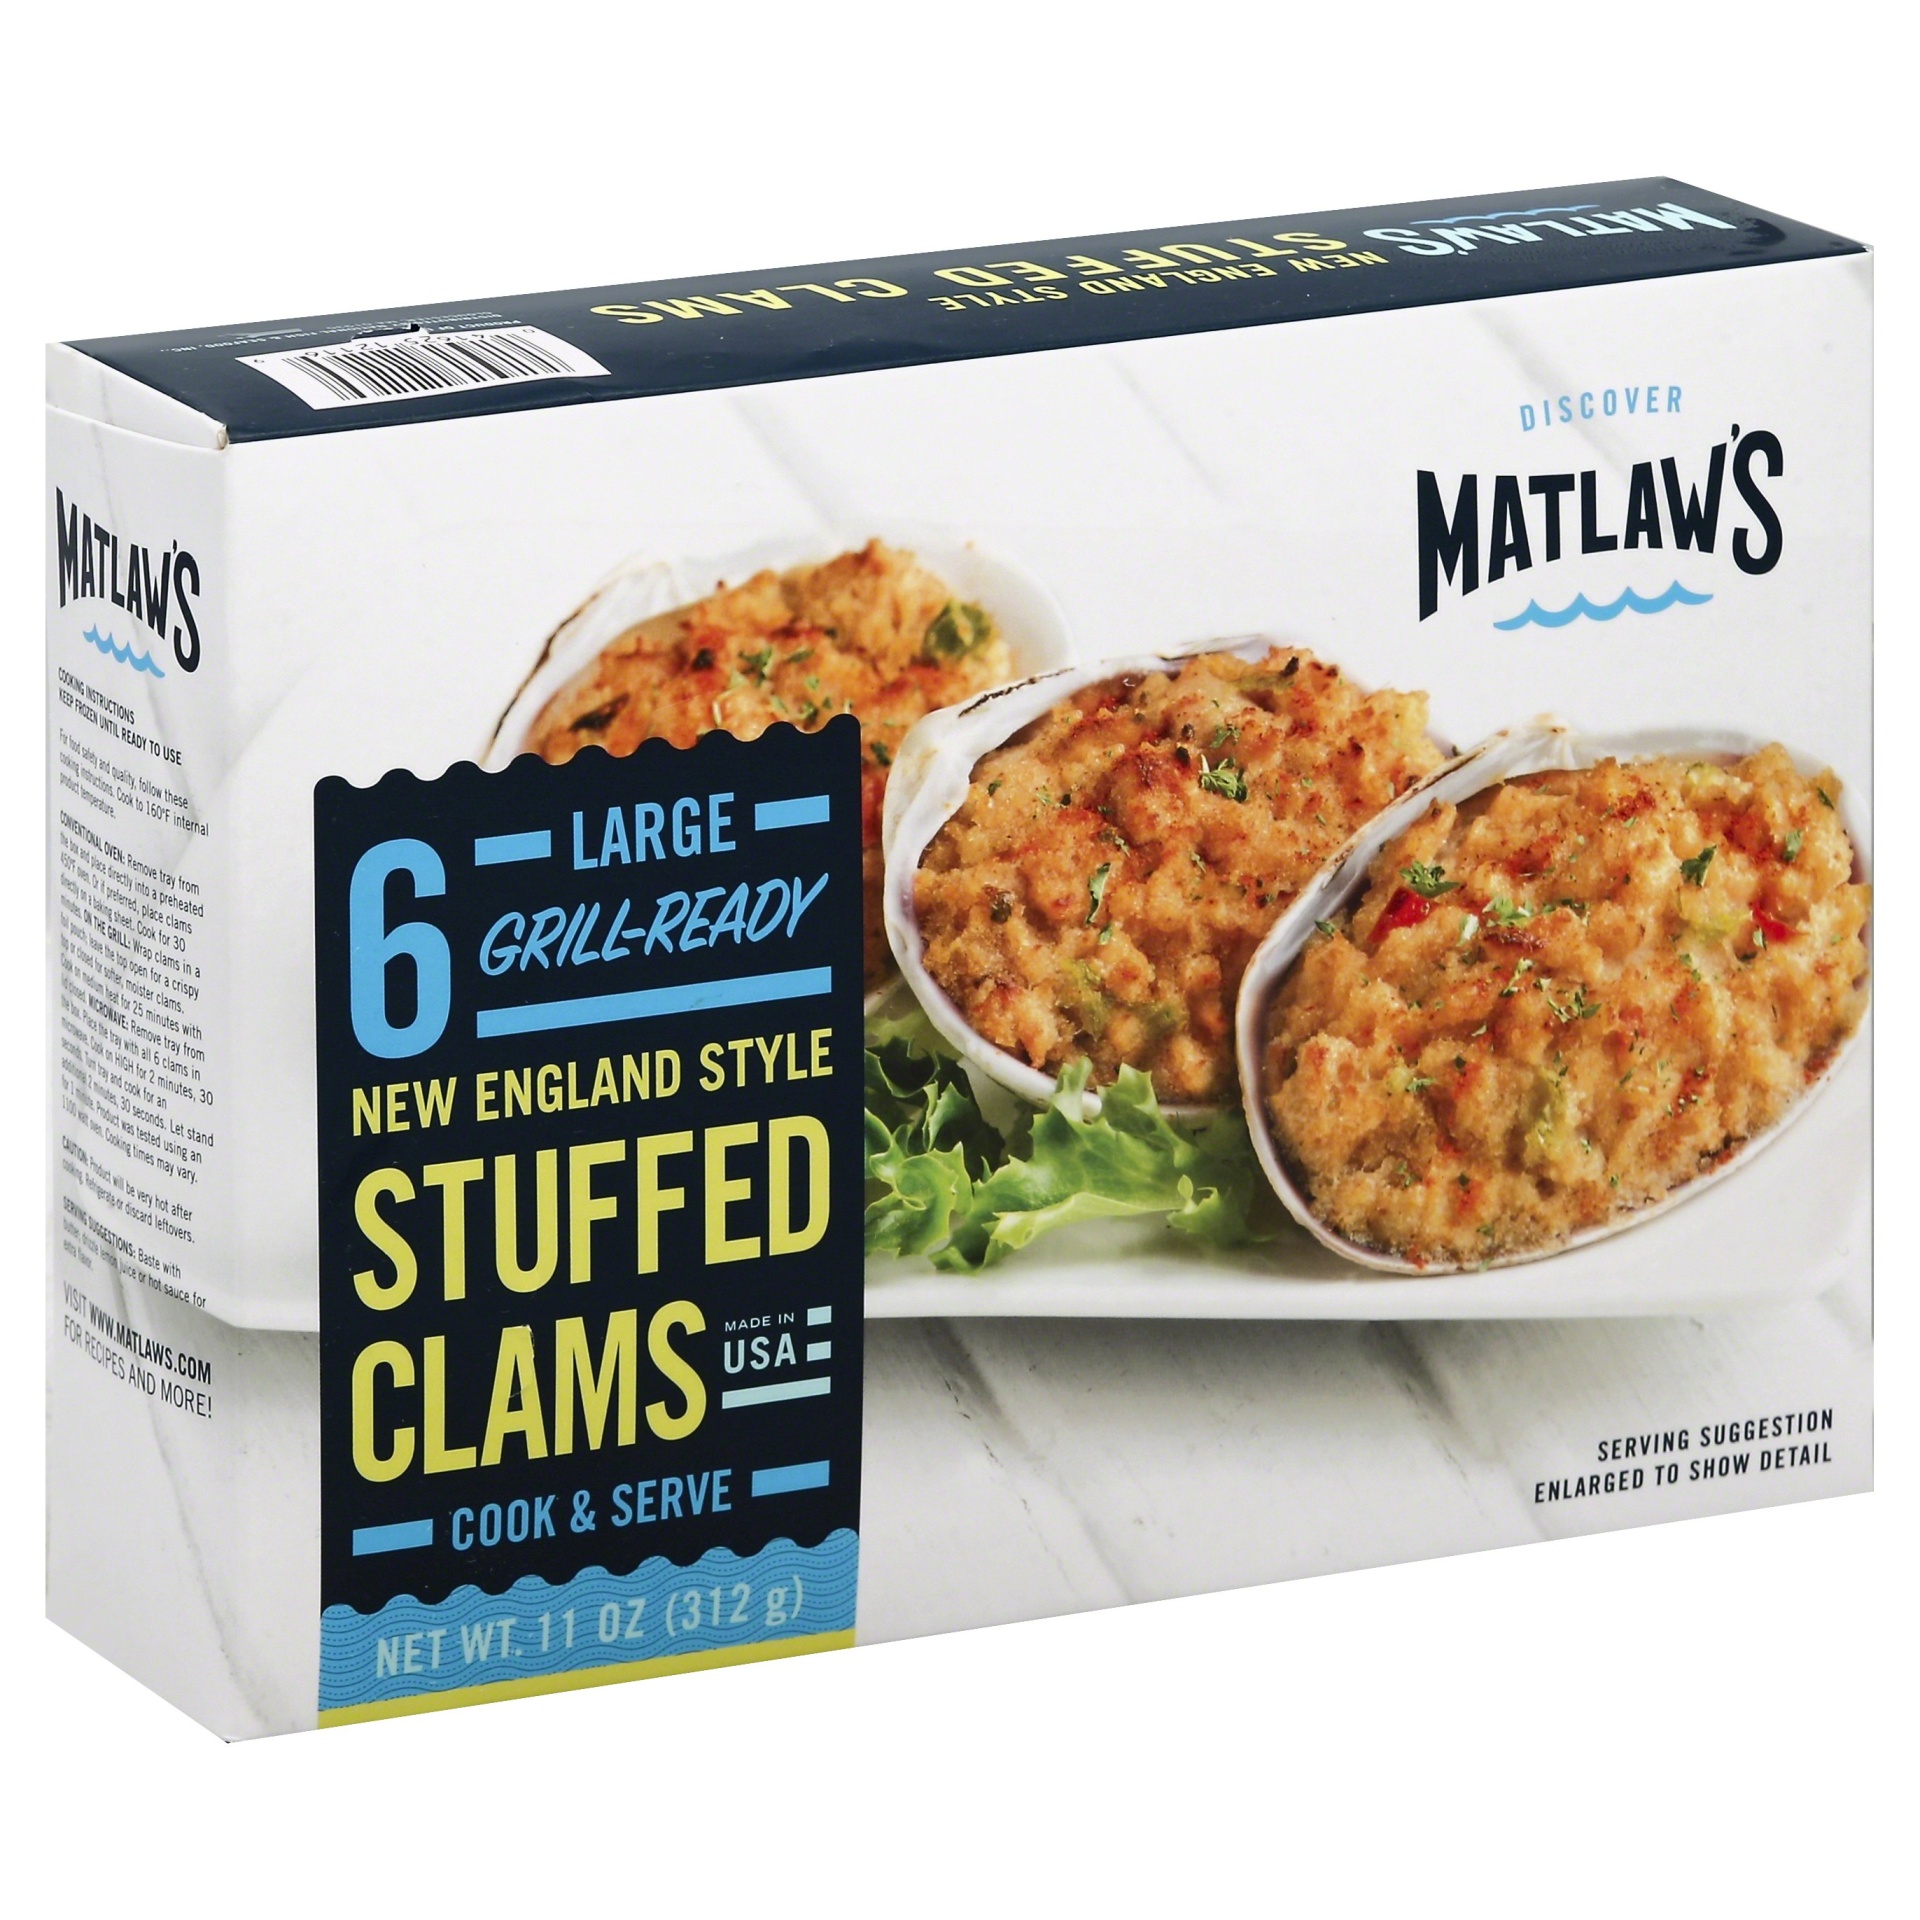 slide 1 of 5, Matlaw's Grill Ready New England Style Stuffed Clams, 6 ct; 11 oz